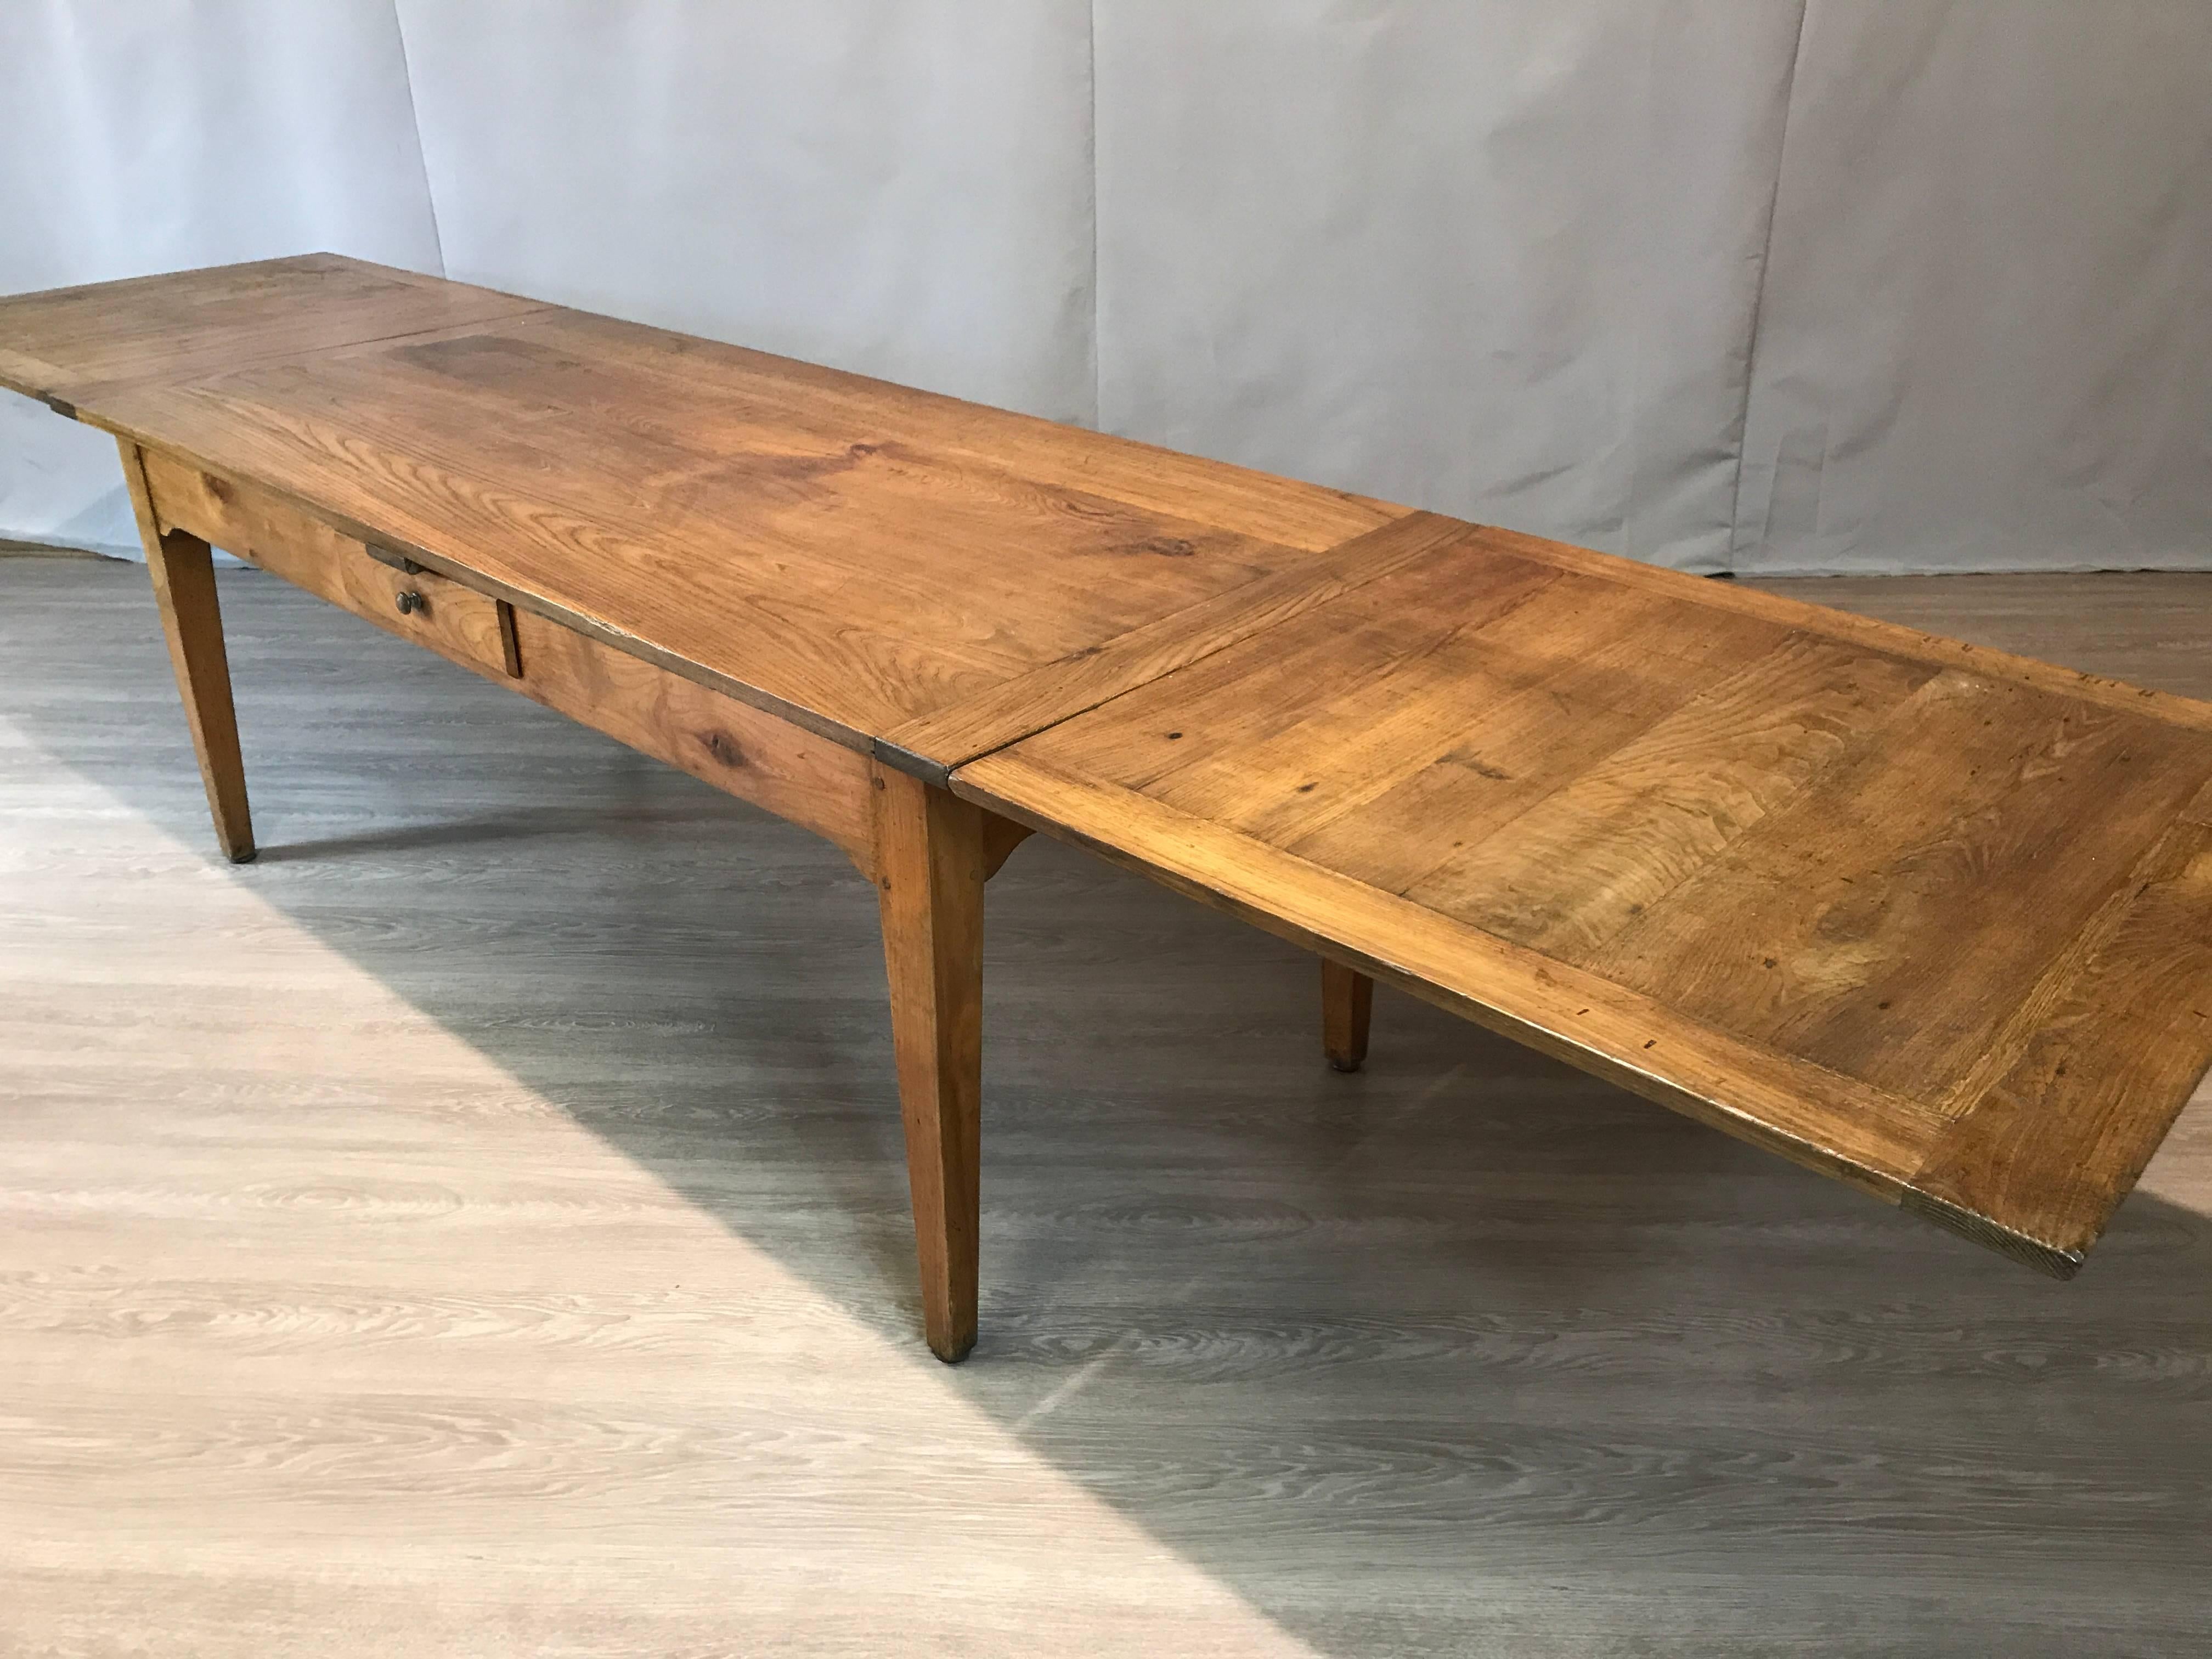 An original 19th century chestnut and cherry base draw-leaf table. This gorgeous table has a four plank chestnut cleated top with two framed chestnut leaves which sit on square tapered legs. The base is made from cherry and has a small side